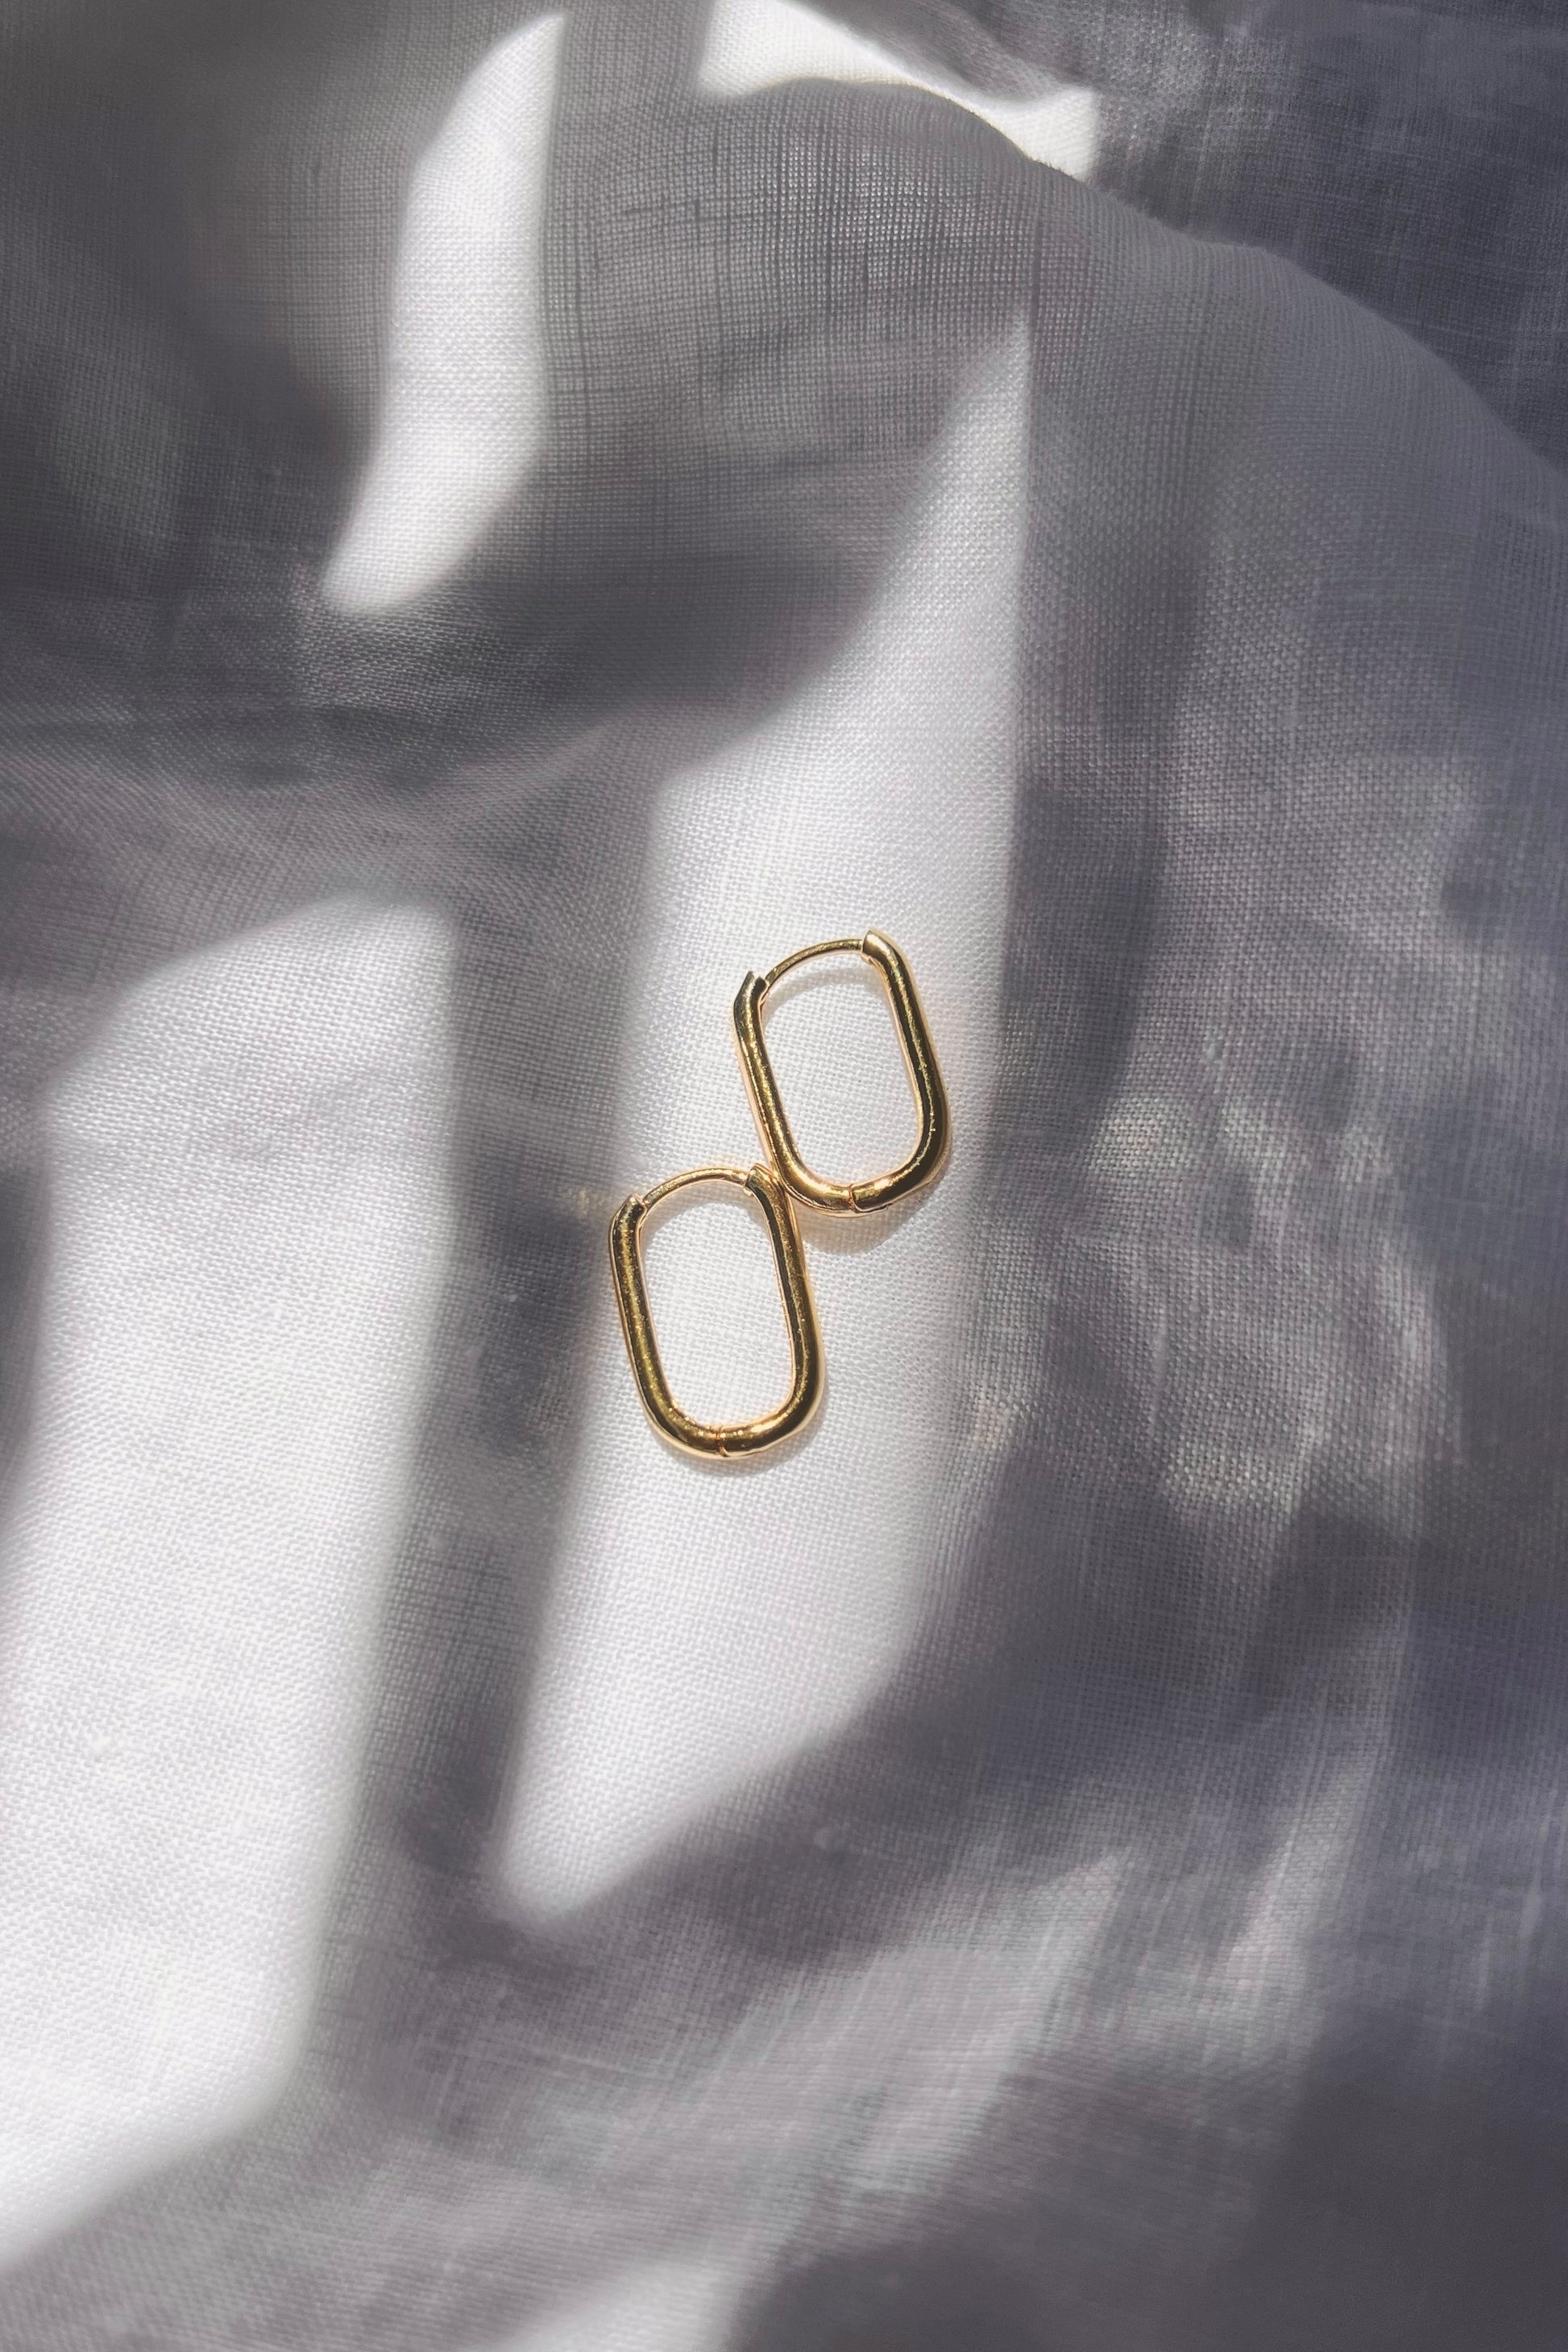 Asa hoops, gold hoops with rounded rectangle shape. The earrings are placed on a white linen fabric with natural sunlight casting over the earrings.